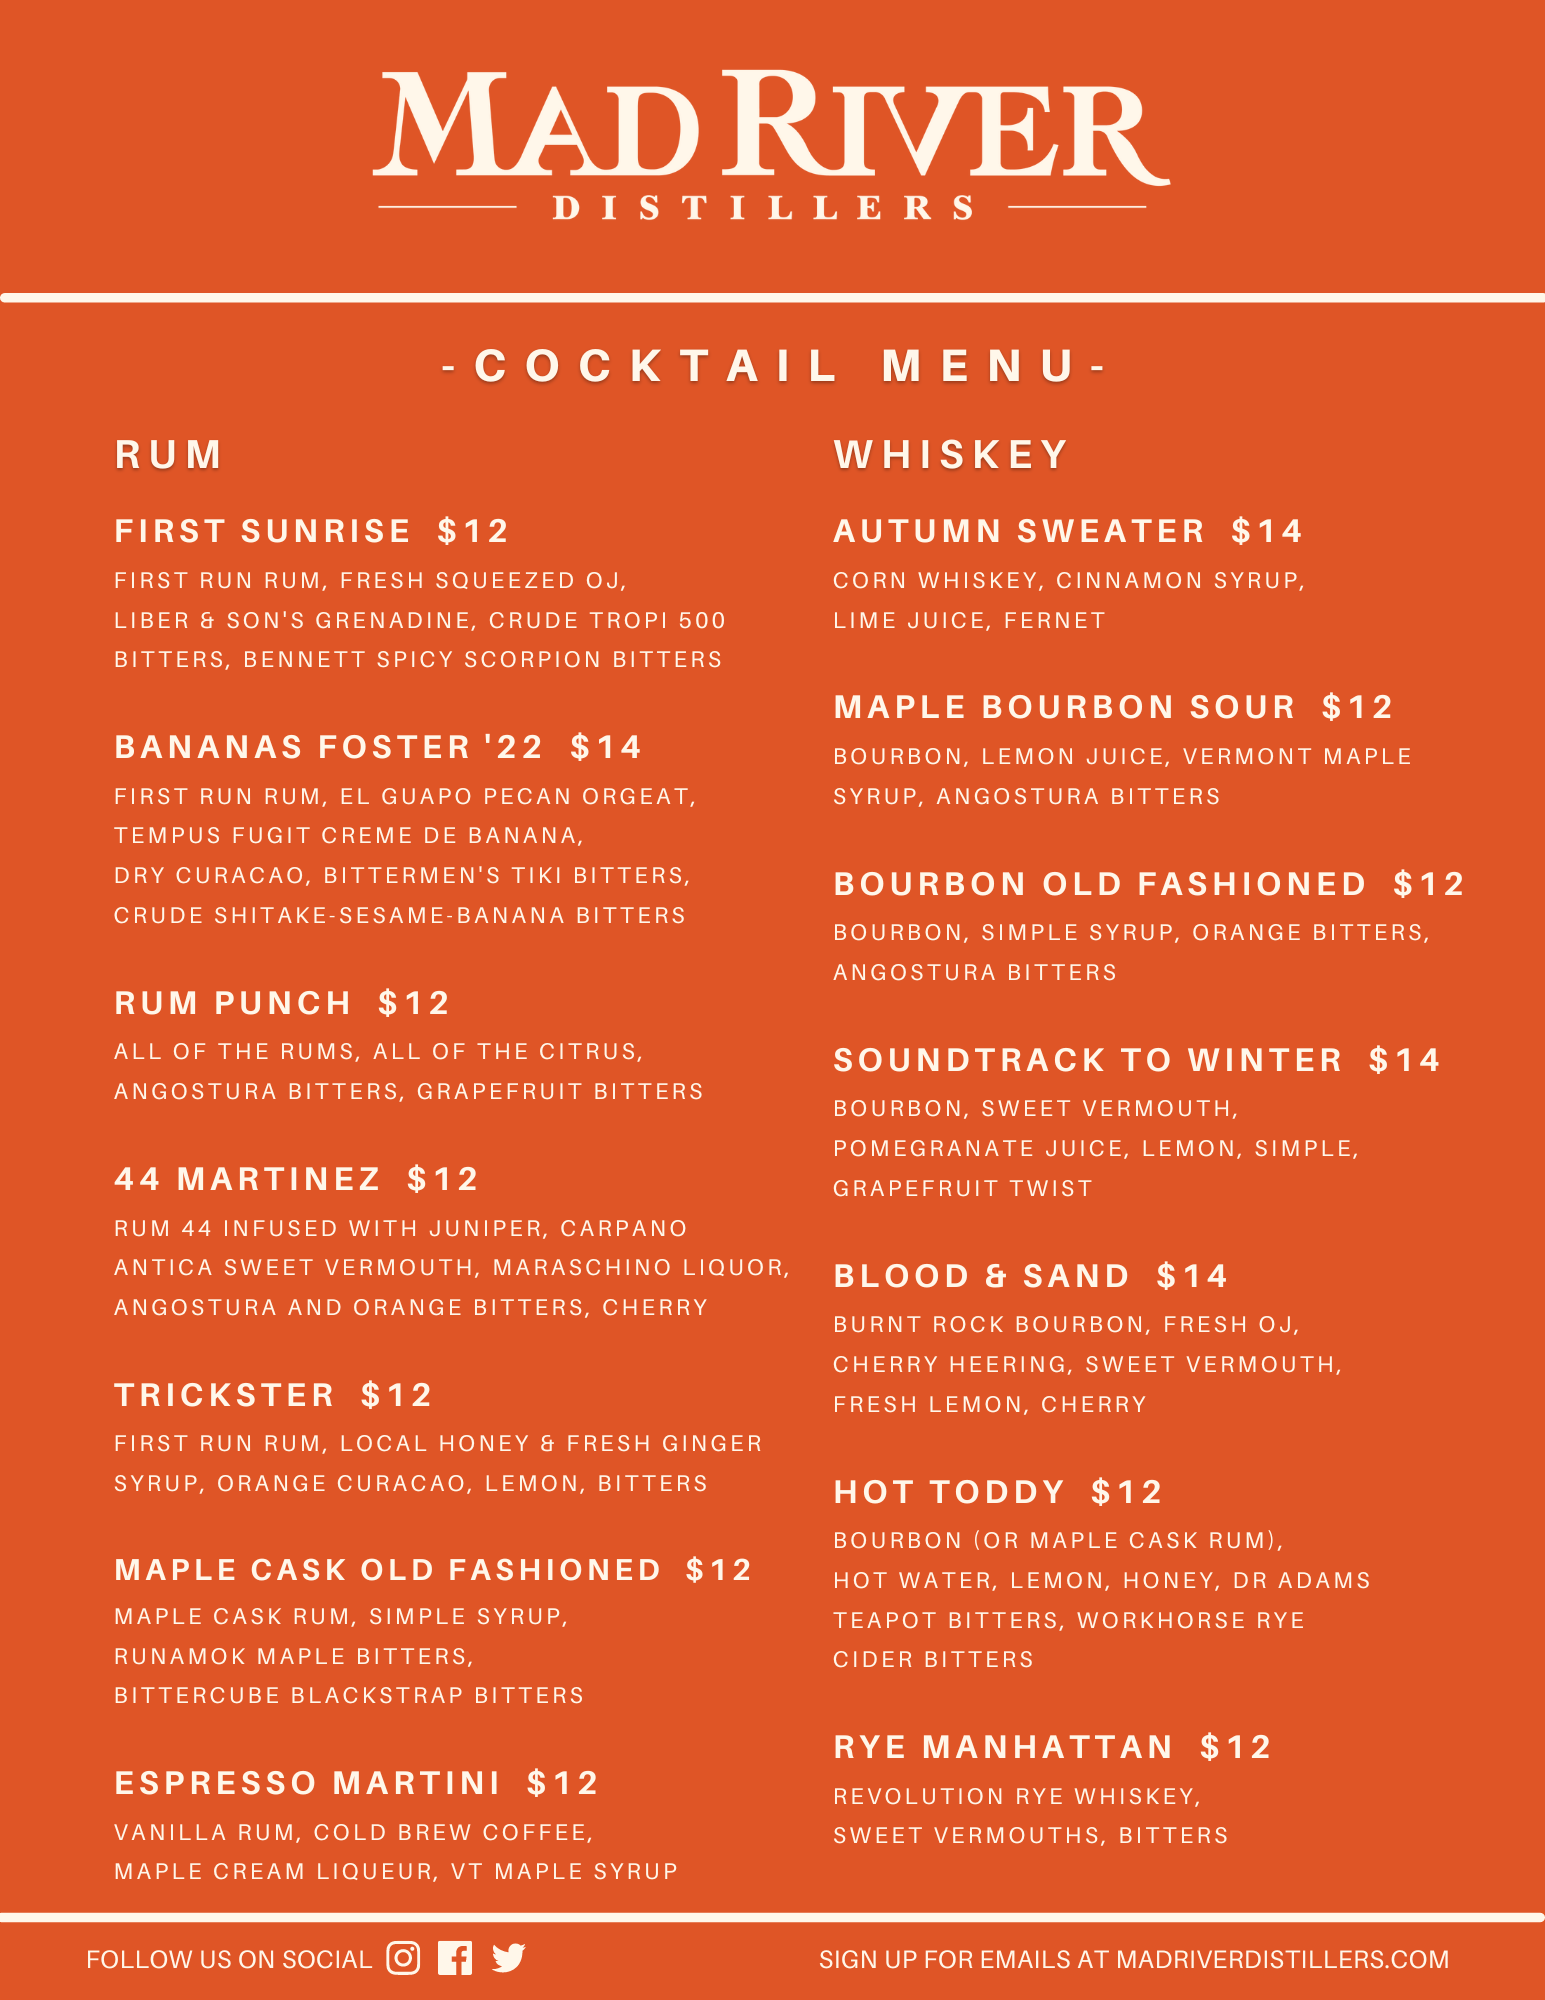 Current cocktail menu includes: First Sunrise, Bananas Foster '22, Rum Punch, 44 Martinez, Trickster, Maple Cask Old Fashioned, Espresso Martini, Autumn Sweater, Maple Bourbon Sour, Bourbon Old Fashioned, Soundtrack to Winter, Blood & Sand, Hot Toddy, Rye Manhattan